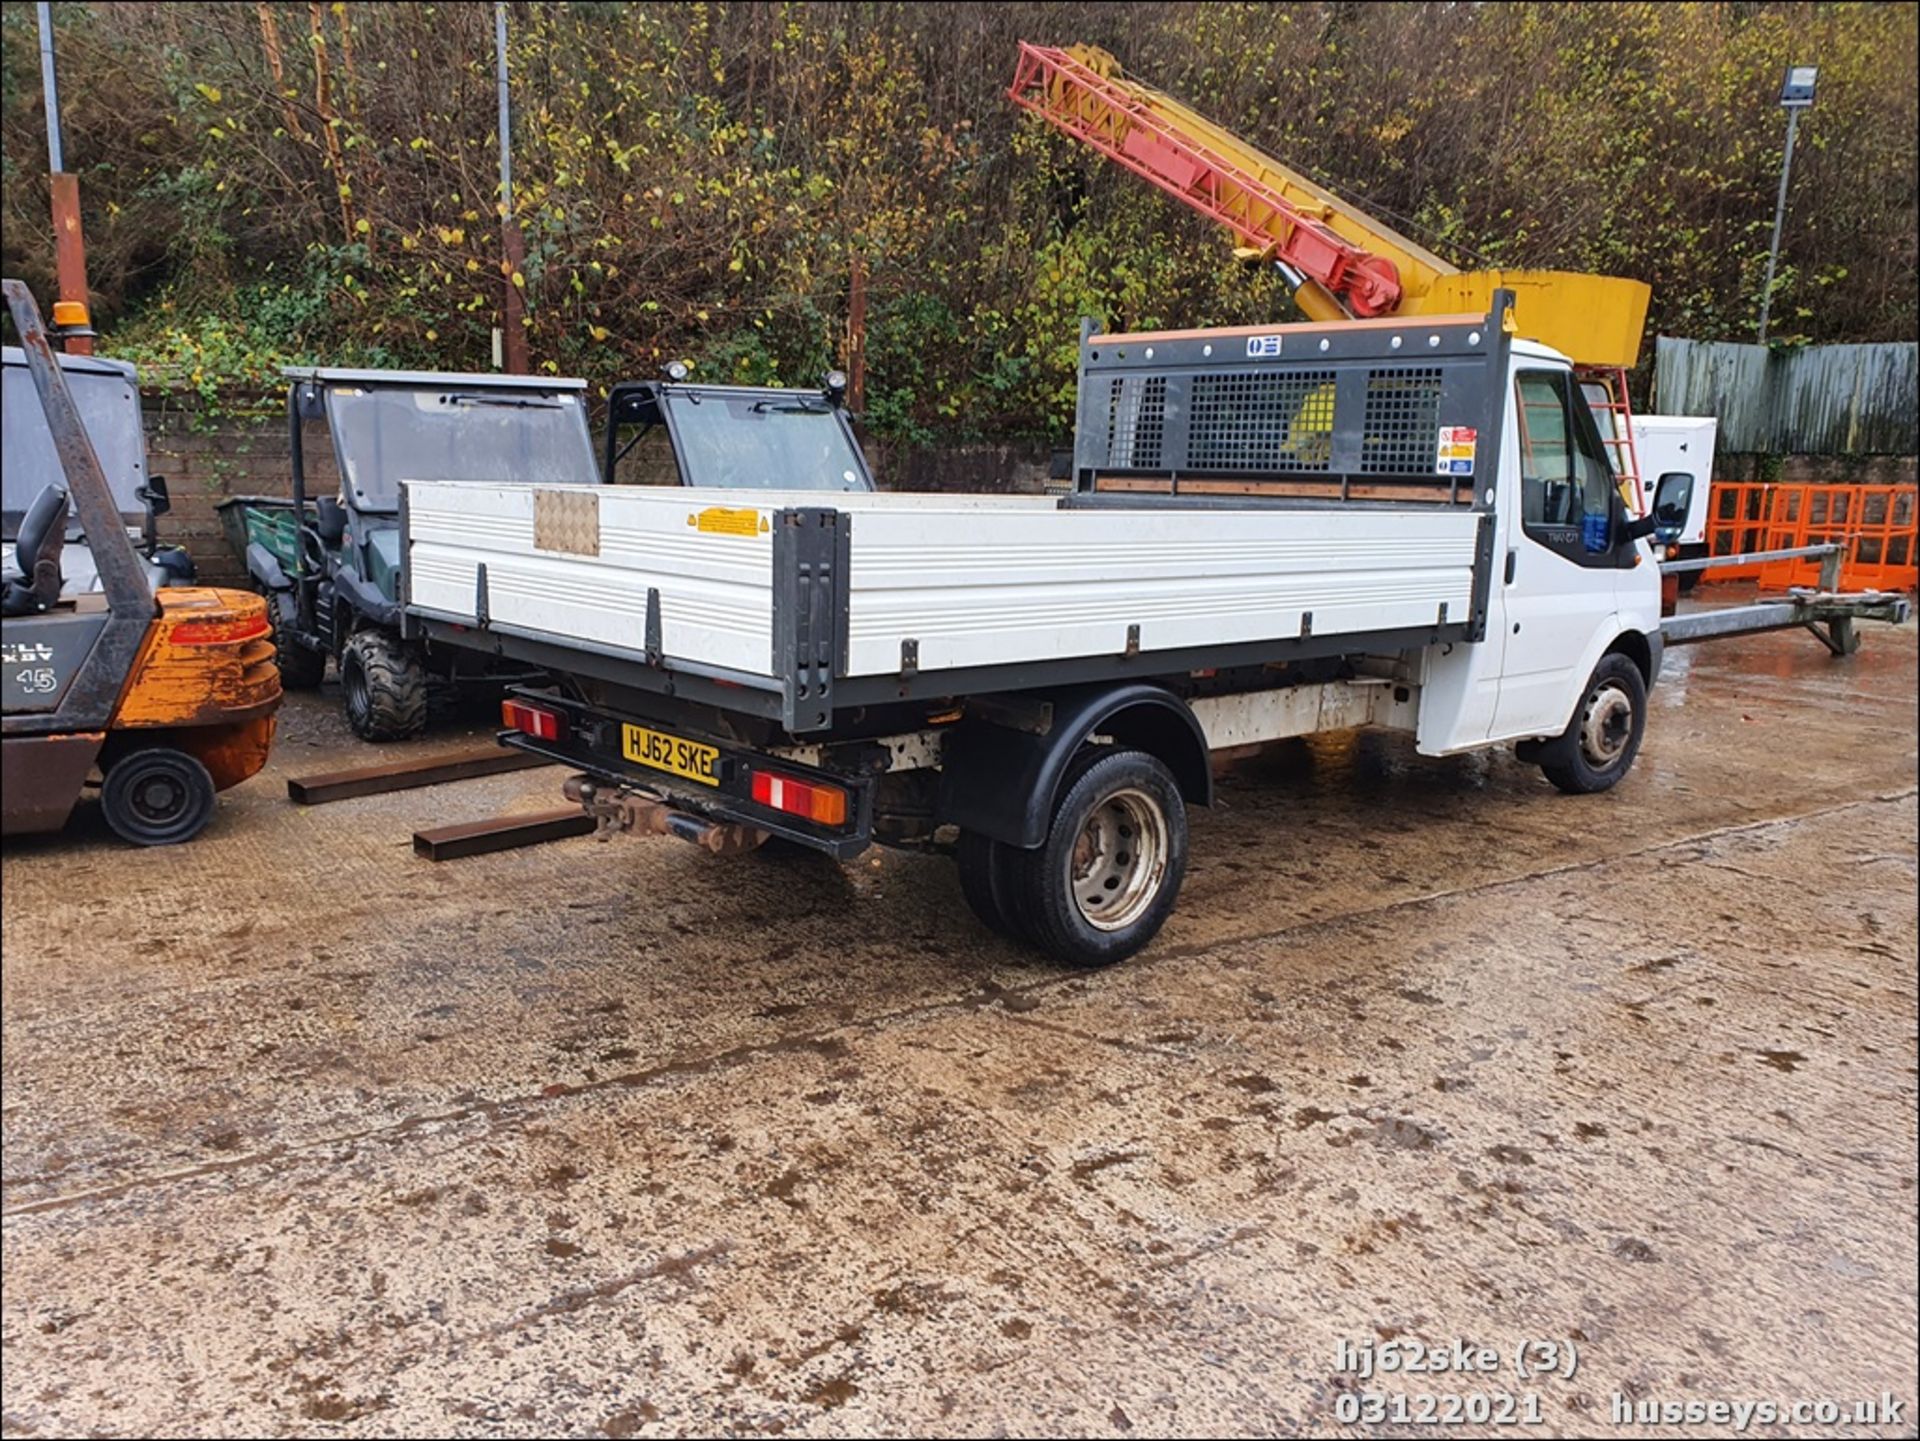 12/62 FORD TRANSIT 125 T350 RWD - 2198cc 2dr Tipper (White, 133k) - Image 4 of 16